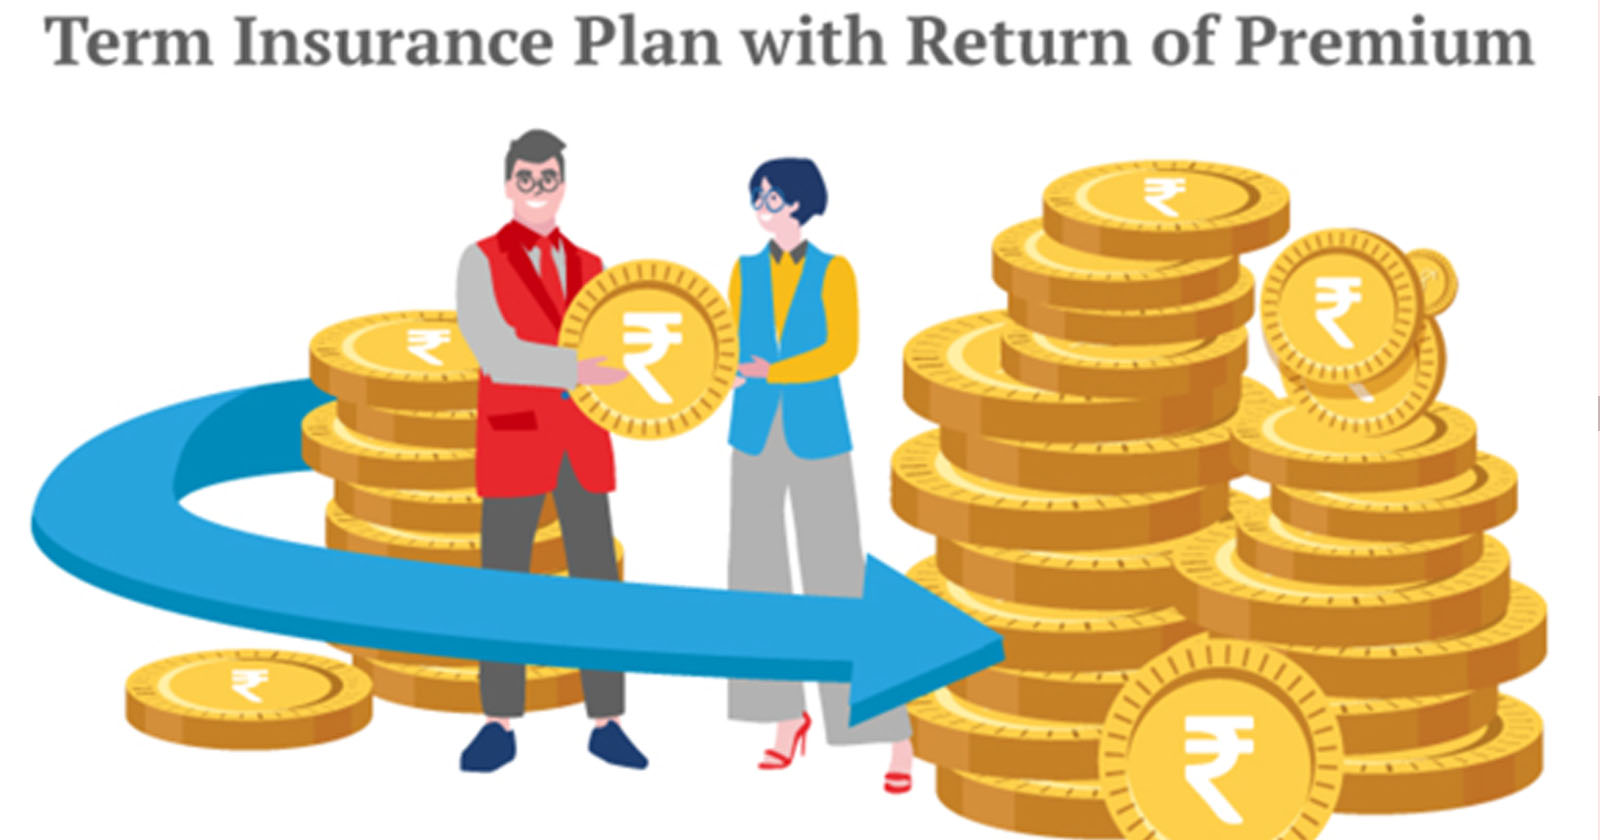 Plan with ROP - Term Plan with ROP - Plan - ROP - Should I Buy It - Buy